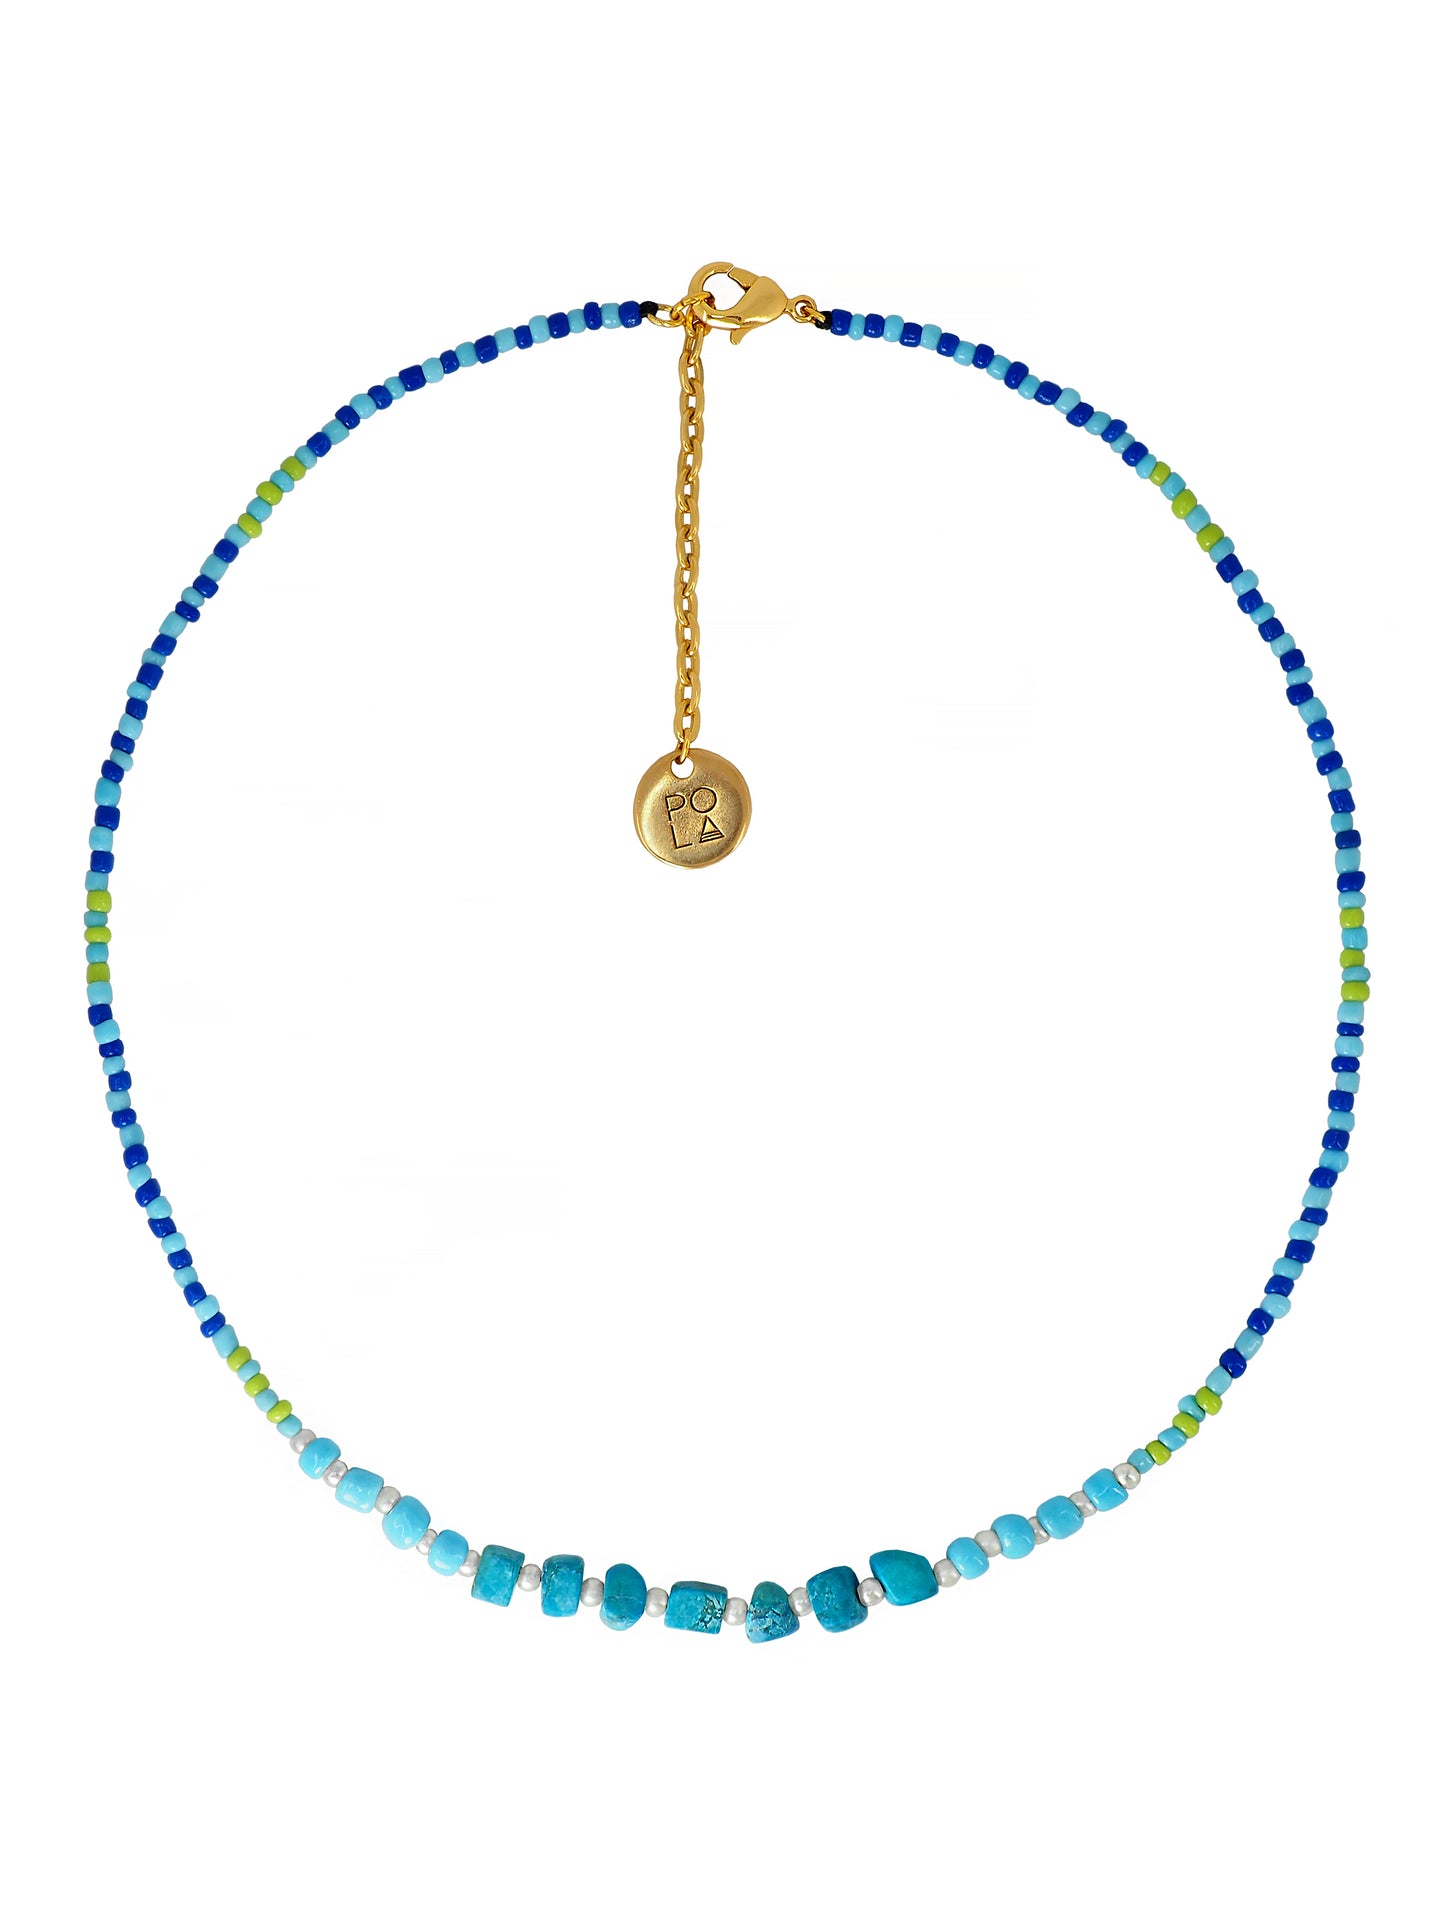 Fun and delicate one String beaded Choker featuring beautiful vintage Turquoises strung evenly along together with some cute faux pearls and glass beads, evocative of the Mediterranean Sea during summer. We have added a Gold plated chain extension so you can wear it also as a short Necklace, Gender Neutral